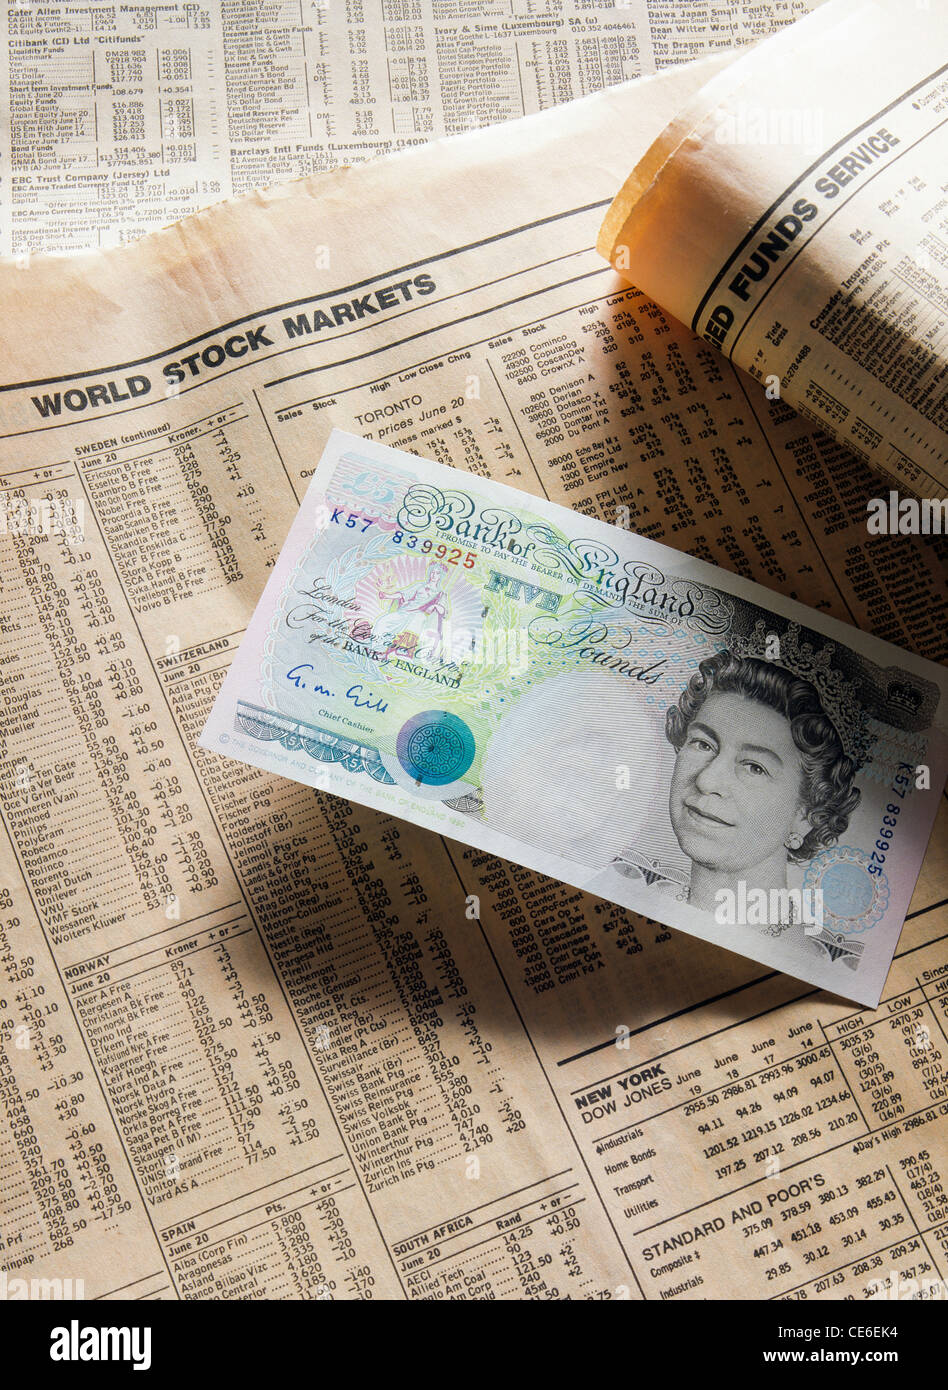 FORMER 5 ENGLISH POUNDS ELIZABETH II BANKNOTE ON FINANCIAL NEWSPAPER Stock Photo